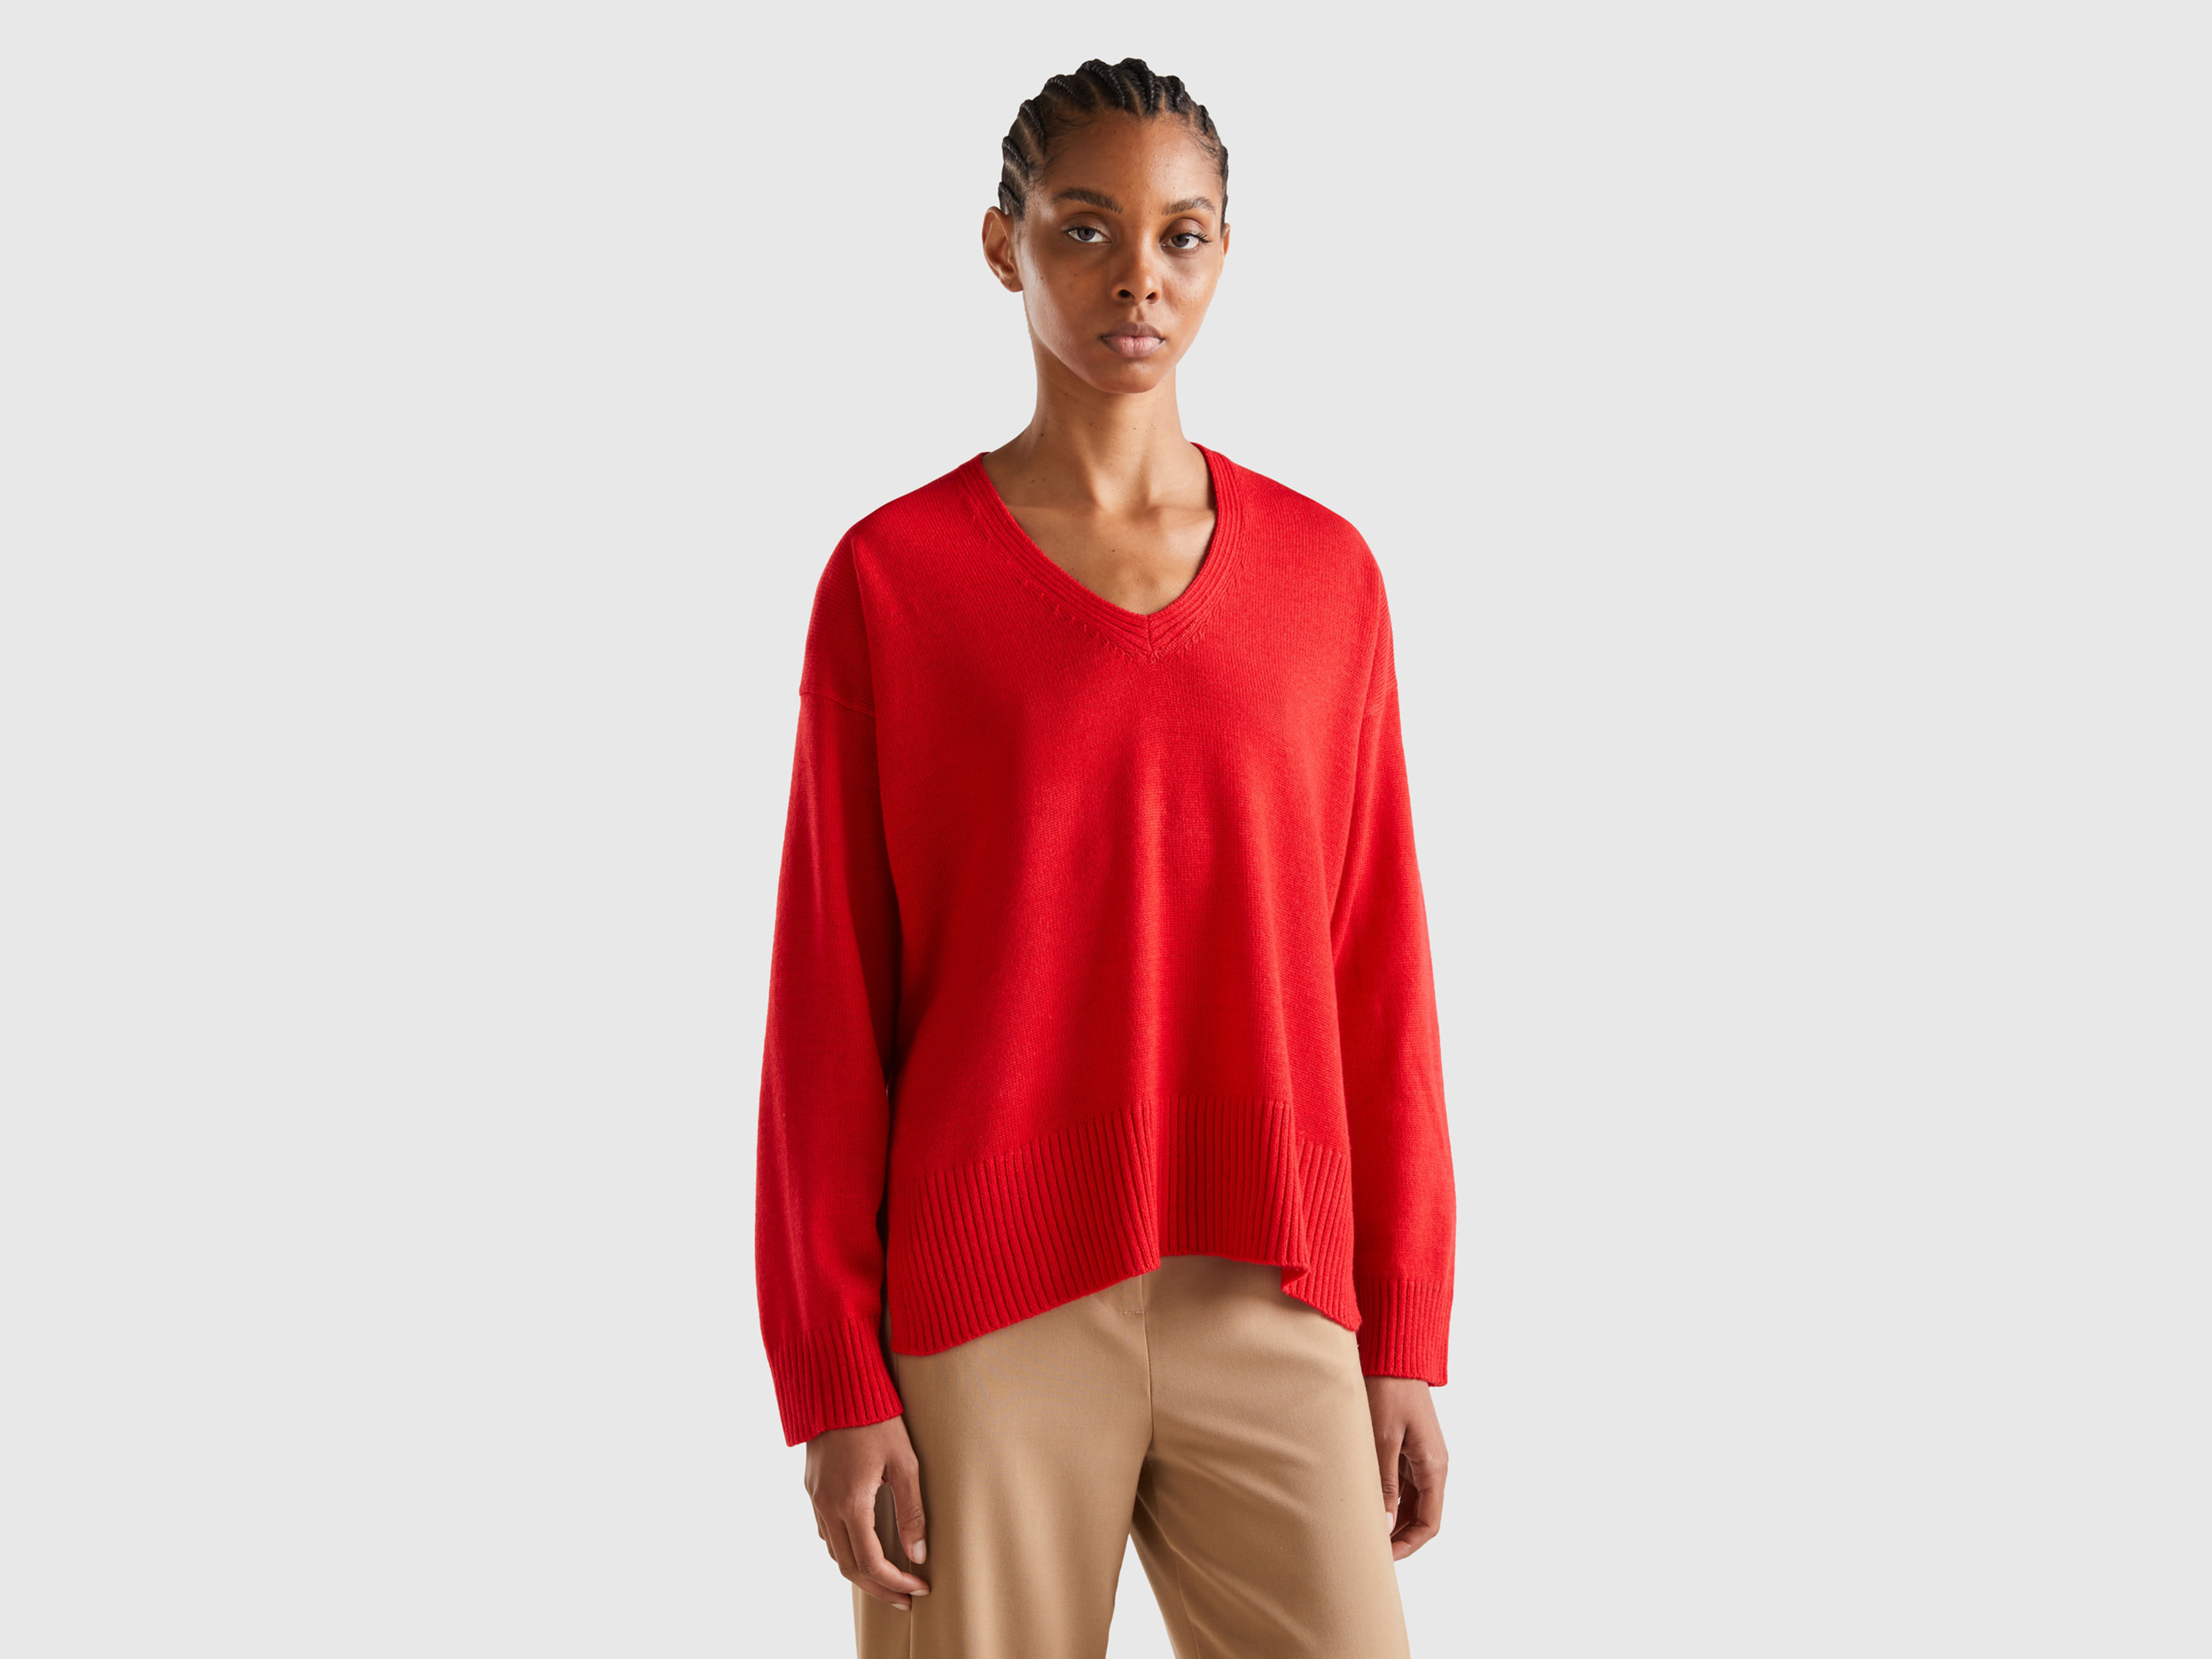 Benetton, Oversized Fit V-neck Sweater, size XS-S, Red, Women